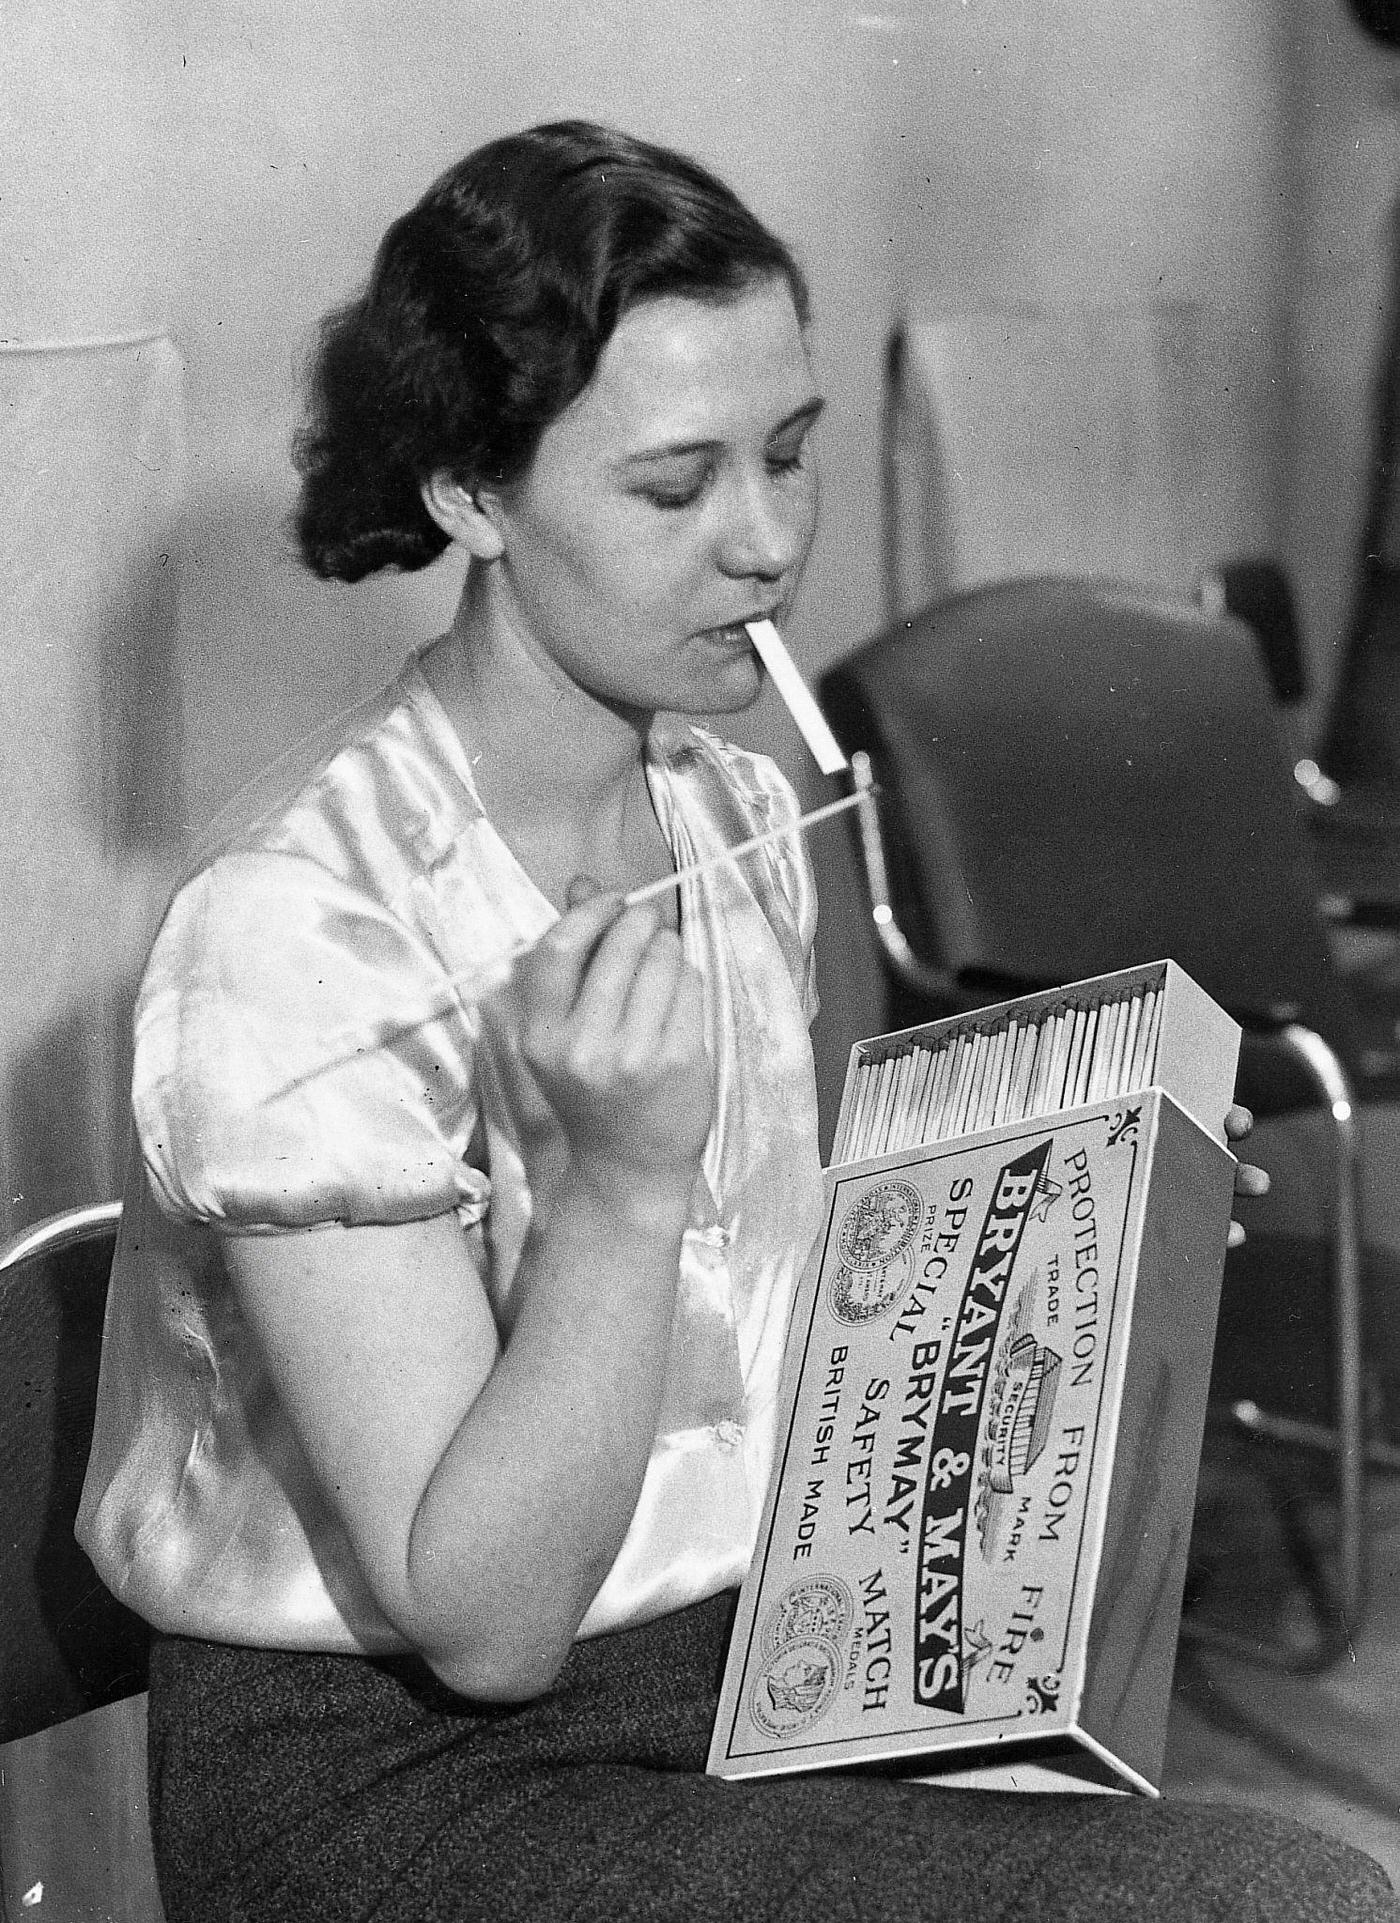 A woman is lighting a cigarette with oversized matches at the 39th International Tabacco Exhibition, London, 1935